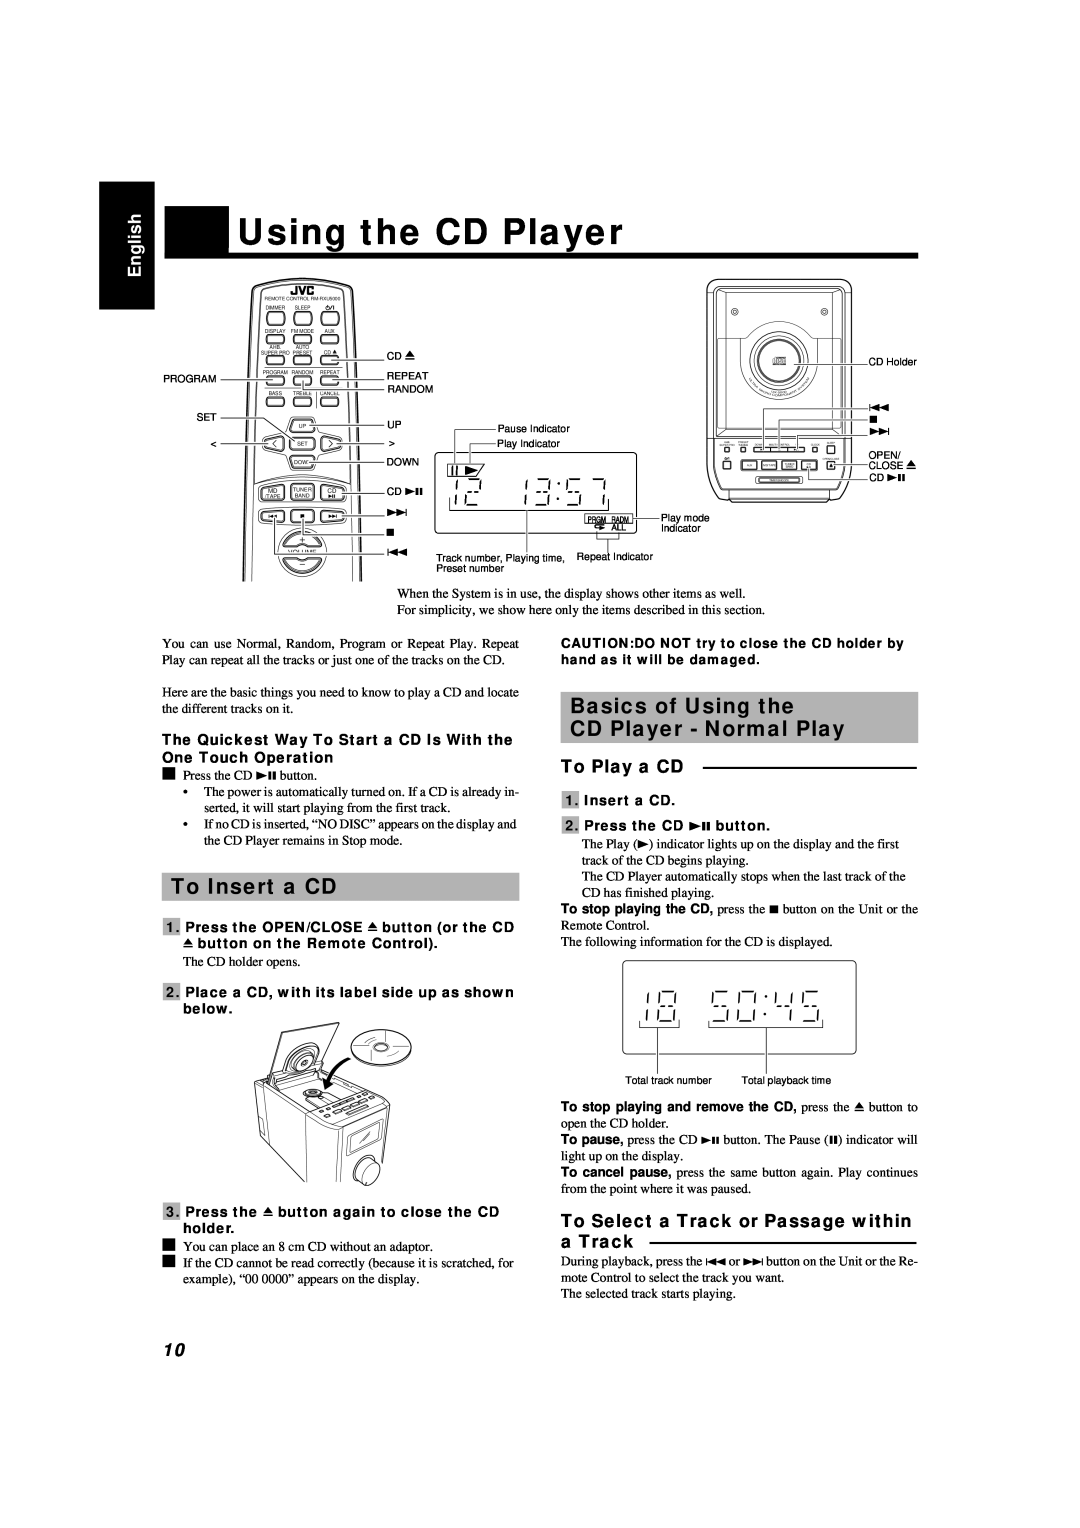 JVC UX-5000 To Insert a CD, Basics of Using the CD Player - Normal Play, To Play a CD, 0button on the Remote Control 